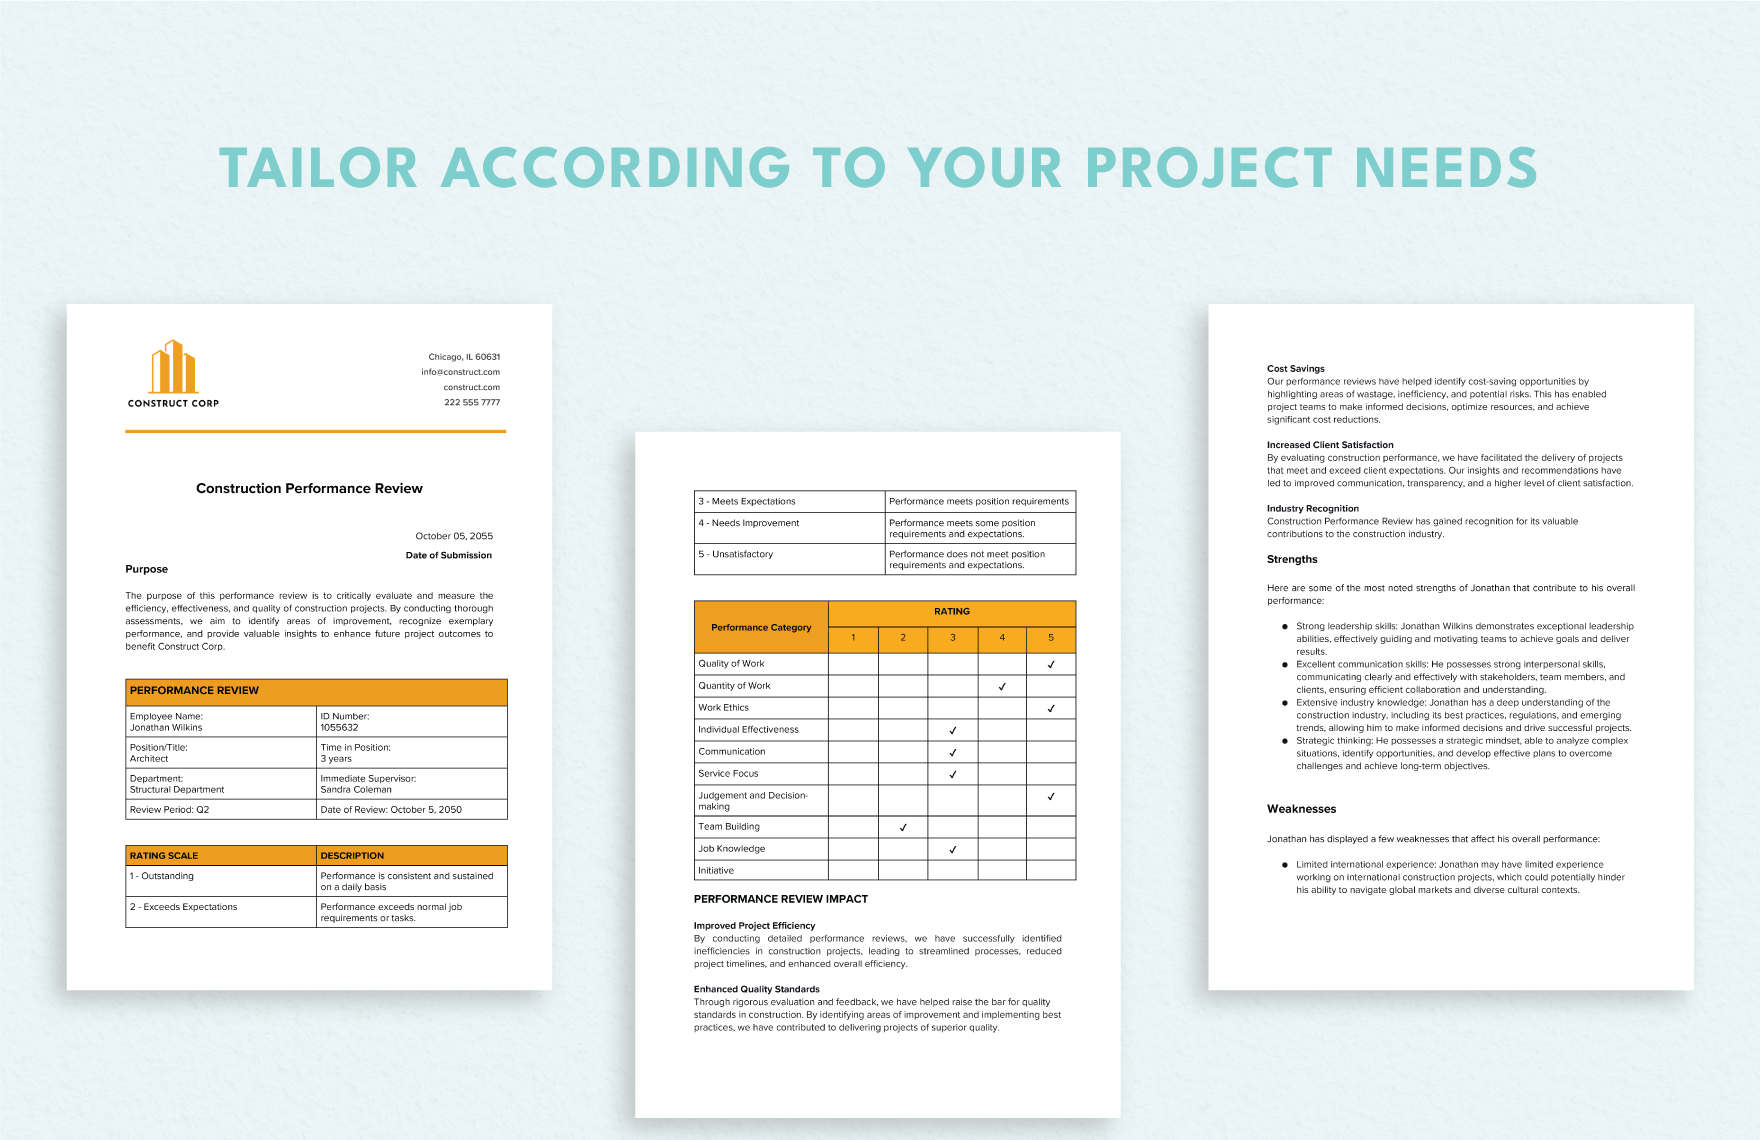 Construction Performance Review Template